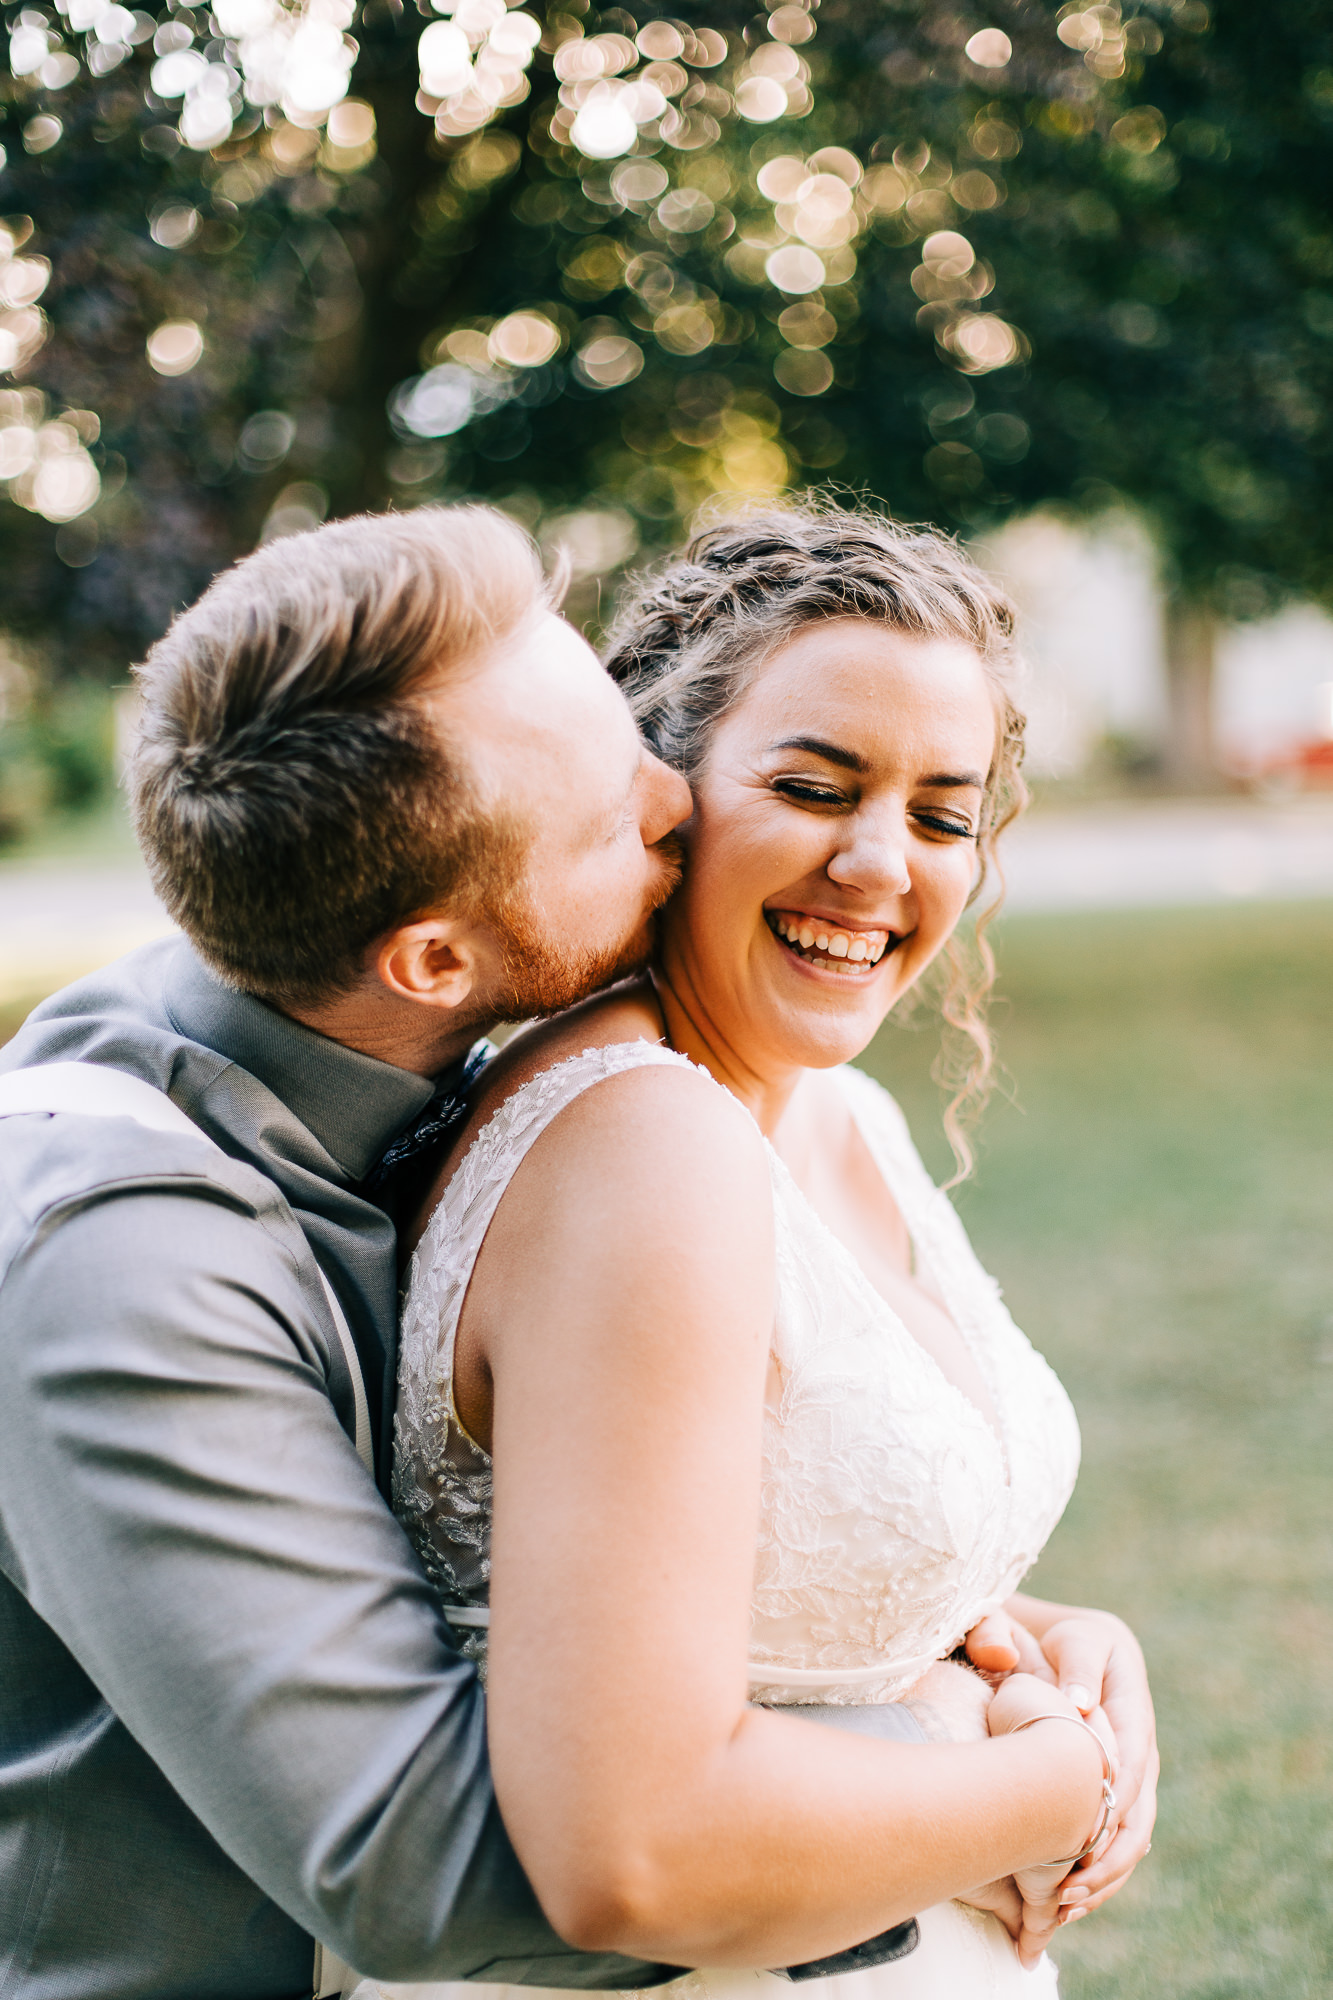 Bride embraces groom with a little laugh in a pine forest